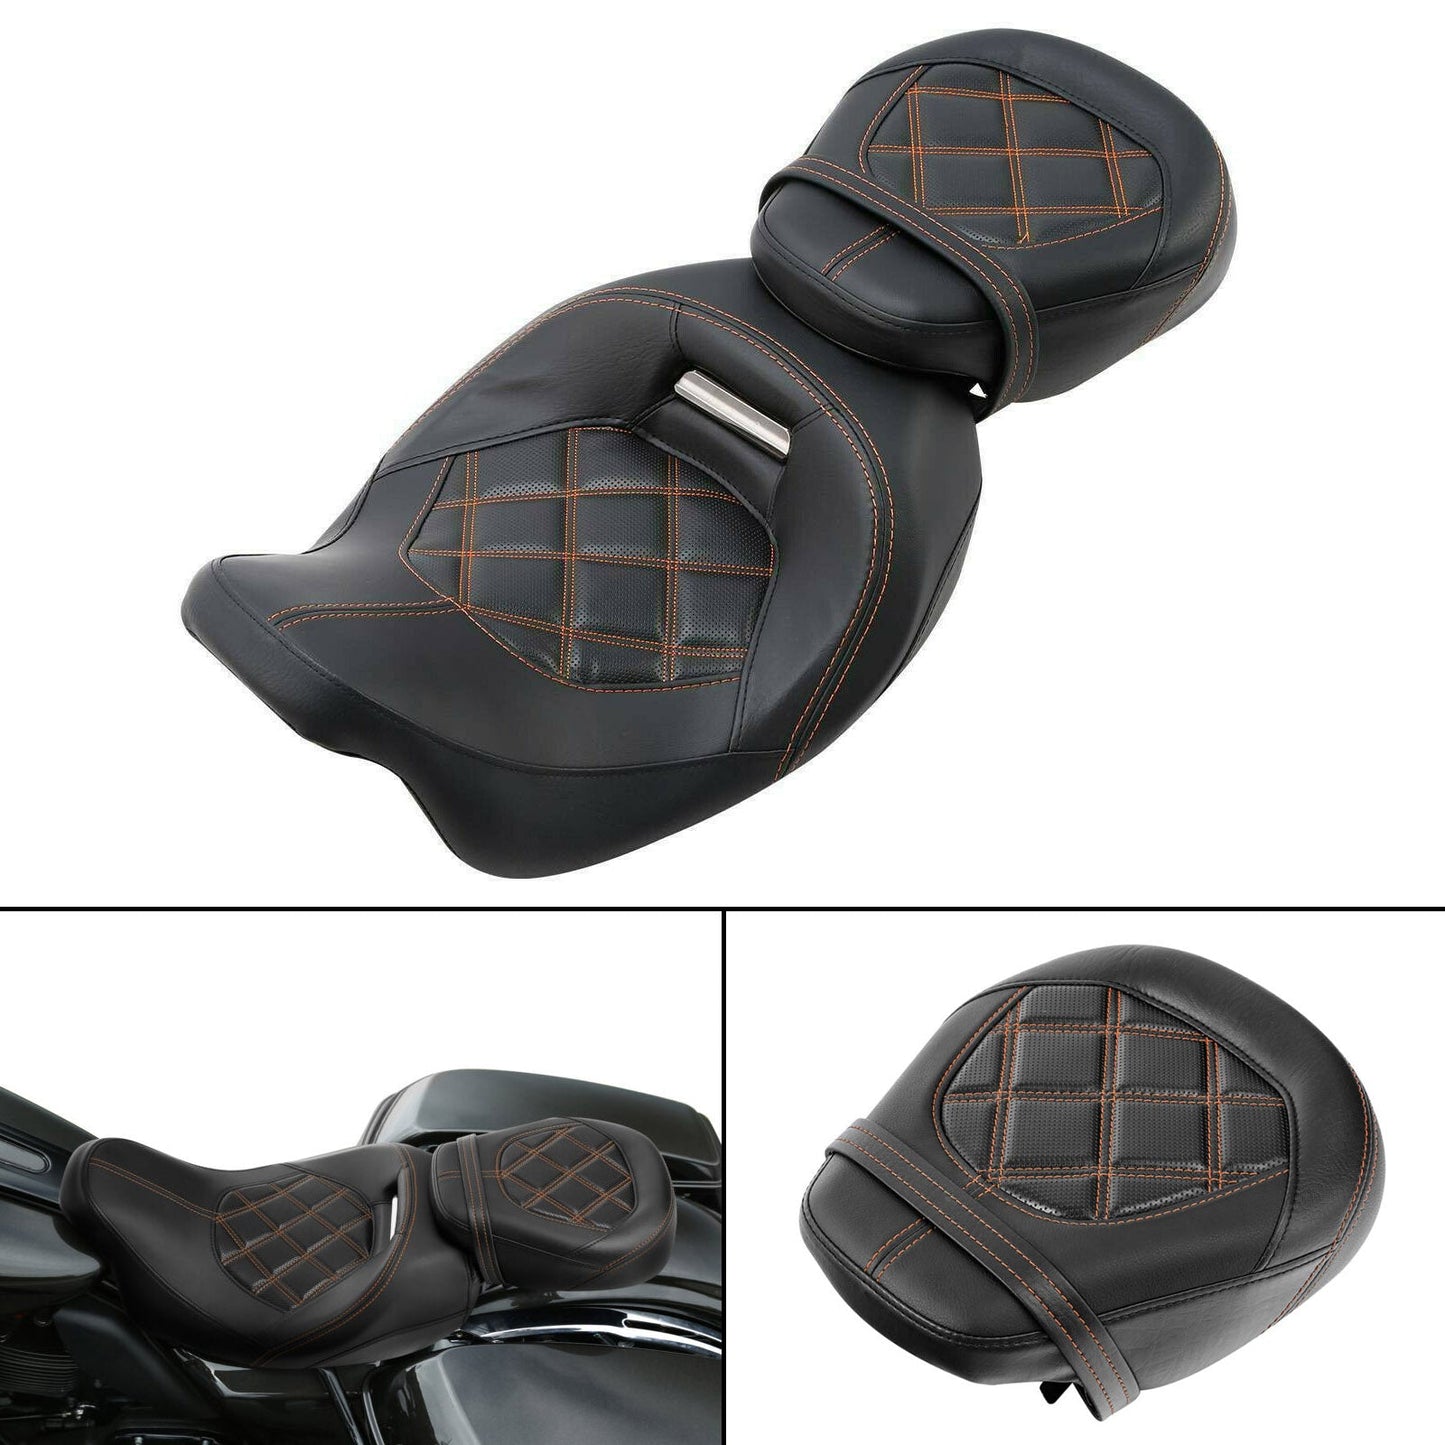 Driver Passenger Seat Fit For Harley Cvo Touring Road Glide Fltr 2009-2021 2020